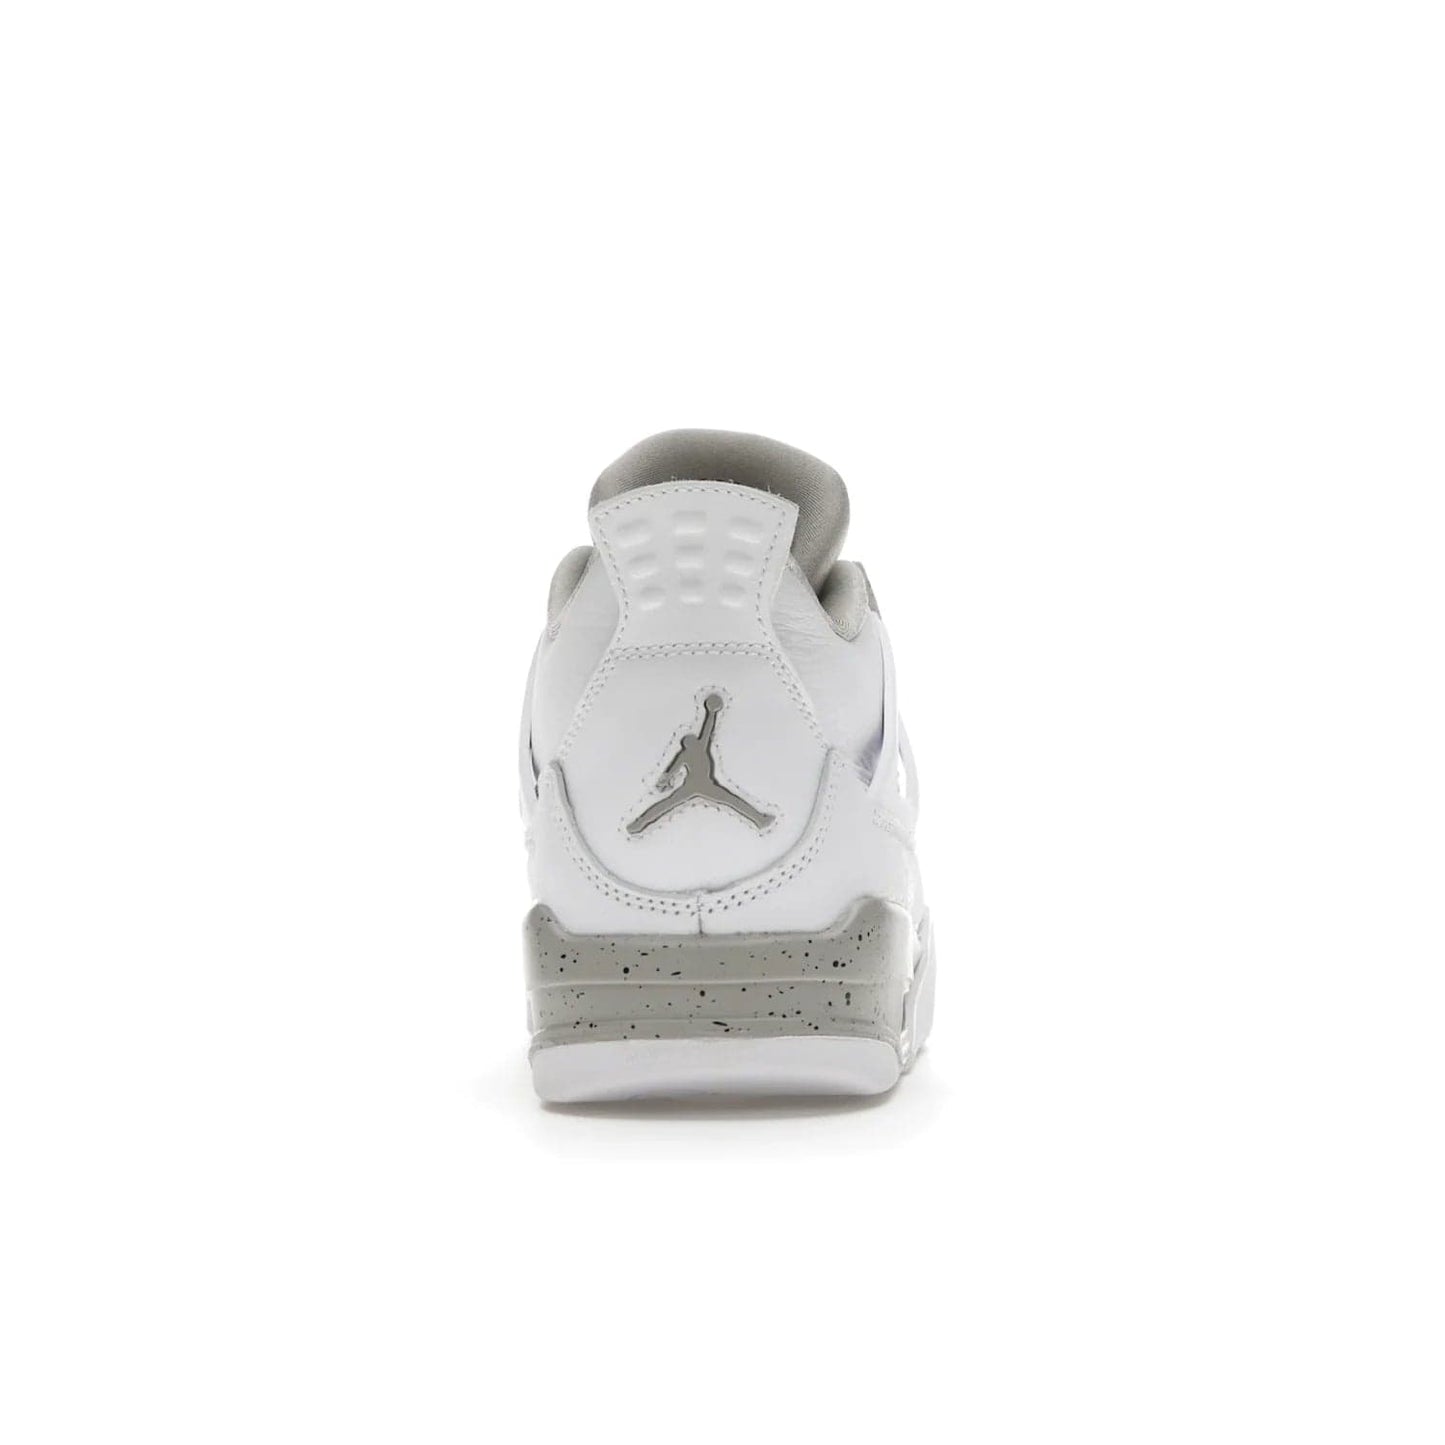 Jordan 4 Retro White Oreo (2021) (GS) - Image 28 - Only at www.BallersClubKickz.com - White Oreo Air Jordan 4 Retro 2021 GS - Iconic sneaker silhouette with white canvas upper, Tech Grey detailing, and Fire Red accents. Available July 2021.